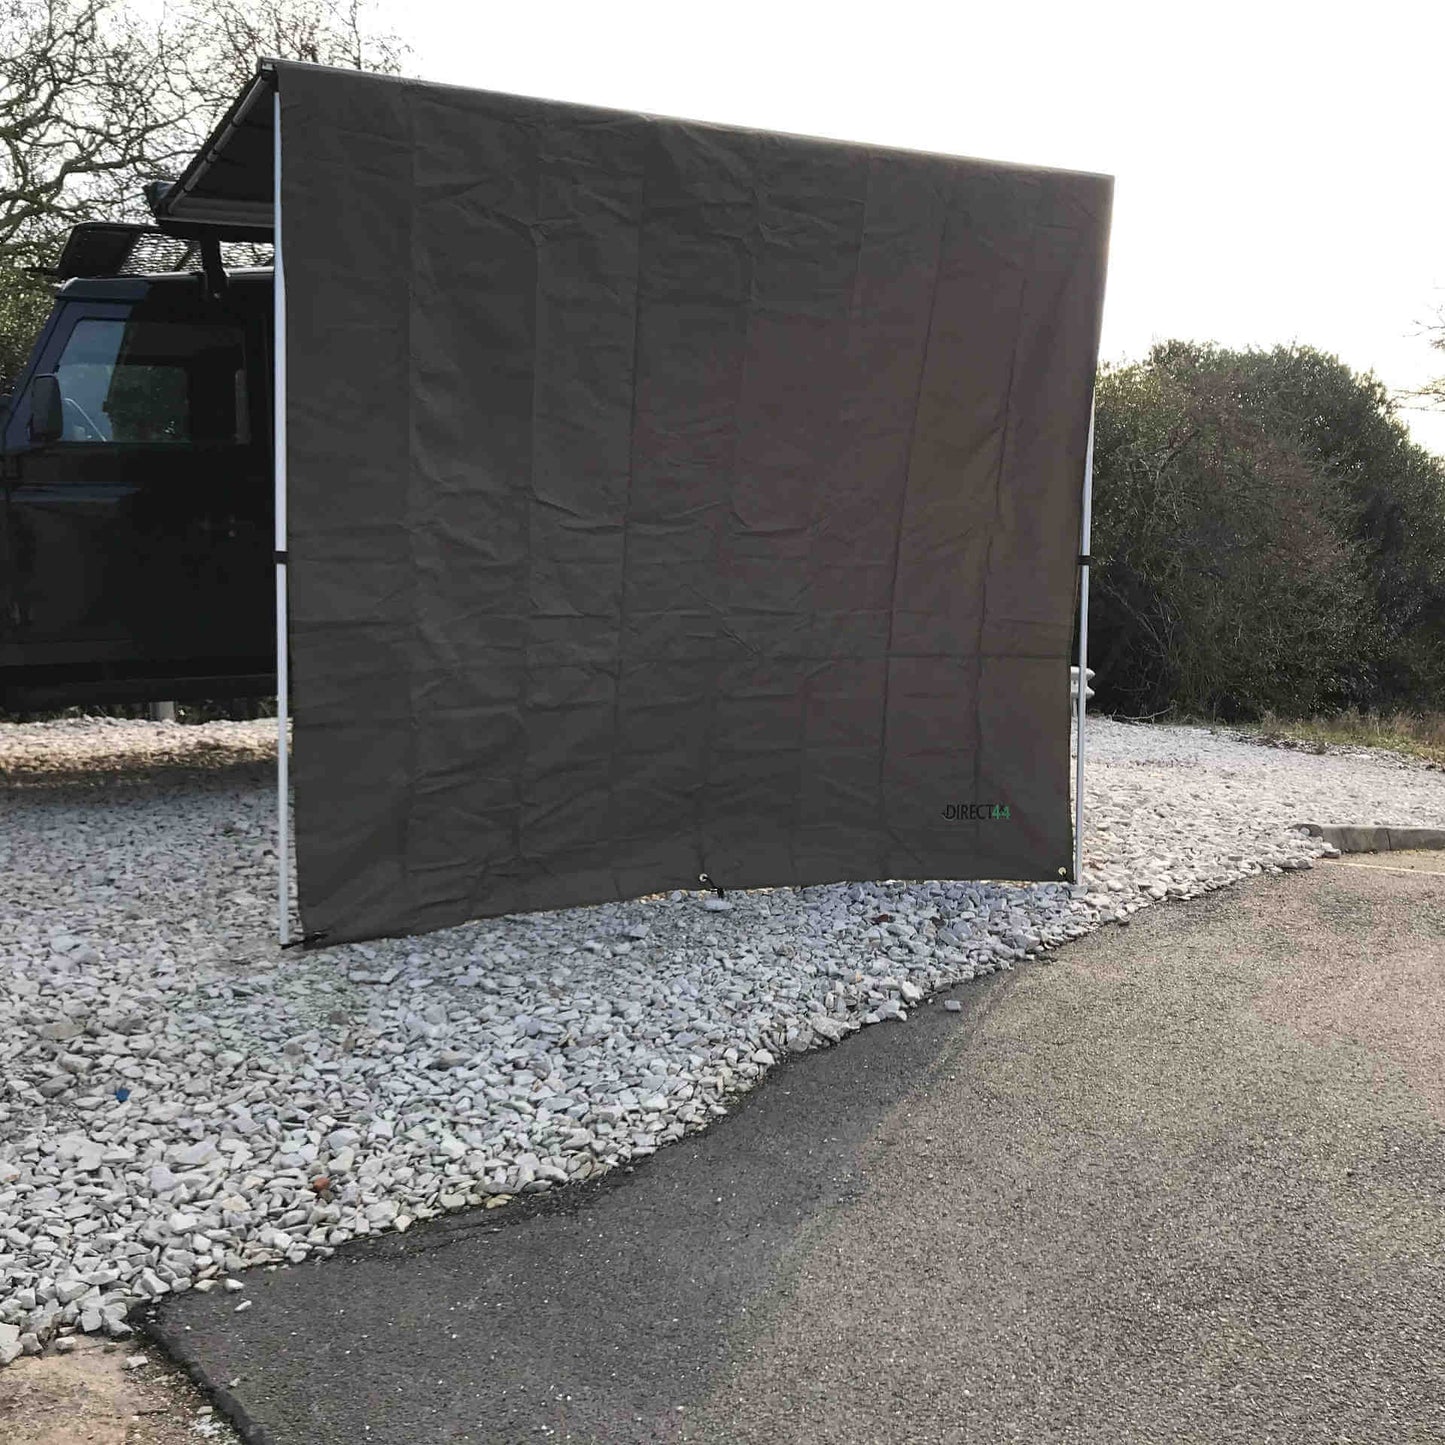 Front Windbreak Wall for Direct4x4 Expedition Awnings - 2mx2.2m Forest Green -  - sold by Direct4x4